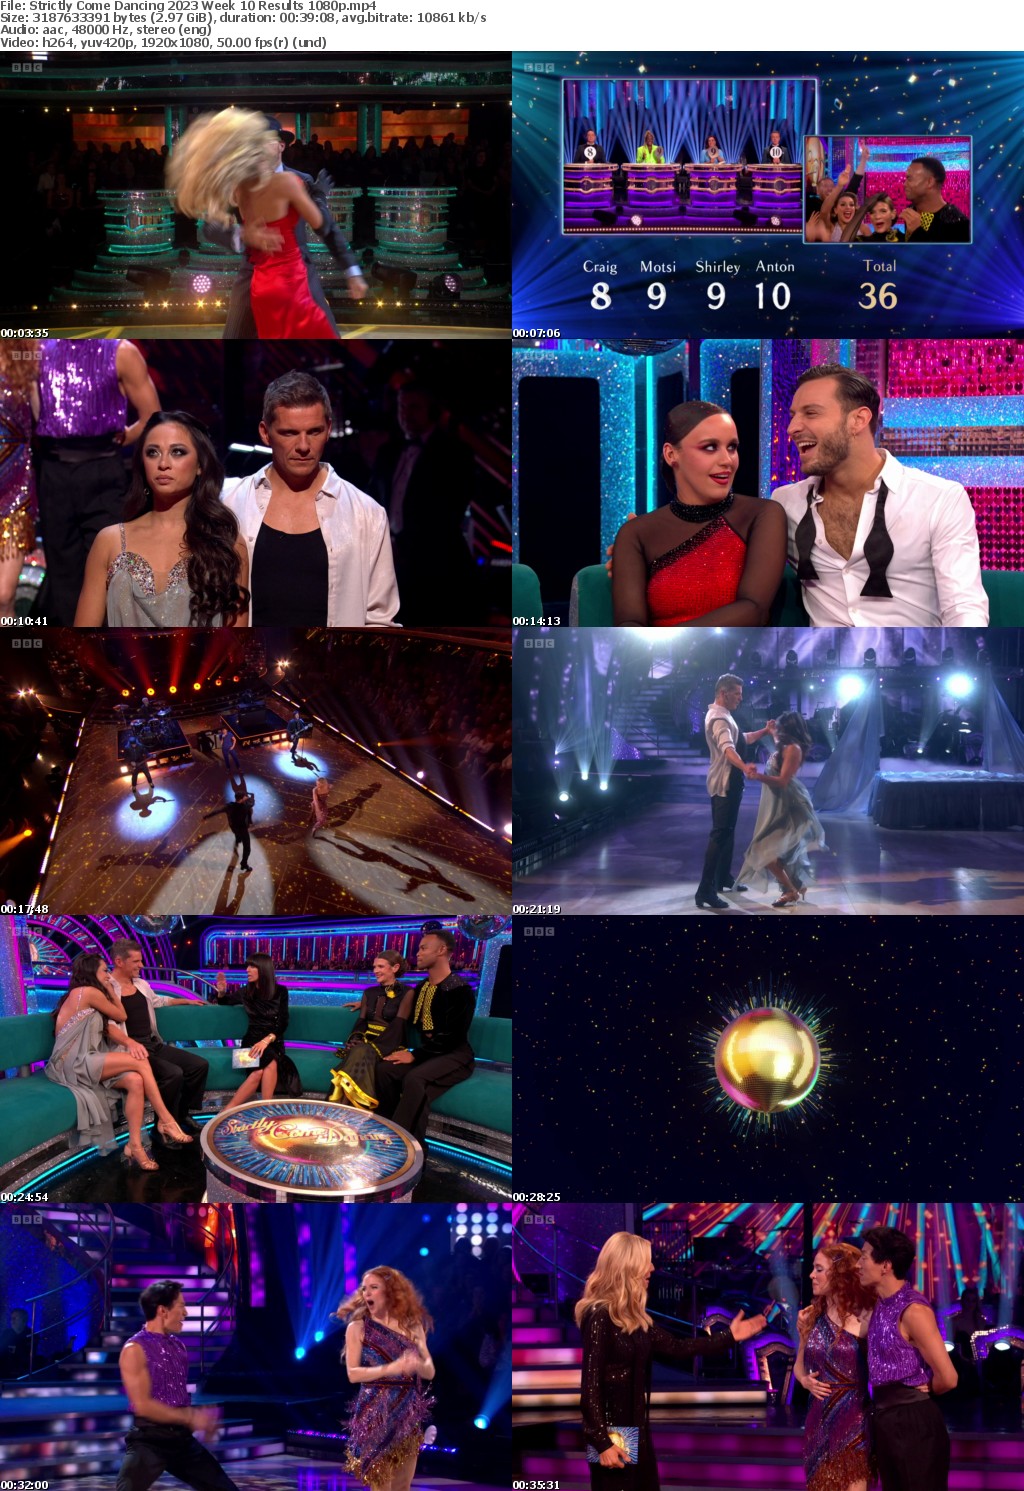 Strictly Come Dancing 2023 Week 10 Results (1080, soft Eng subs)